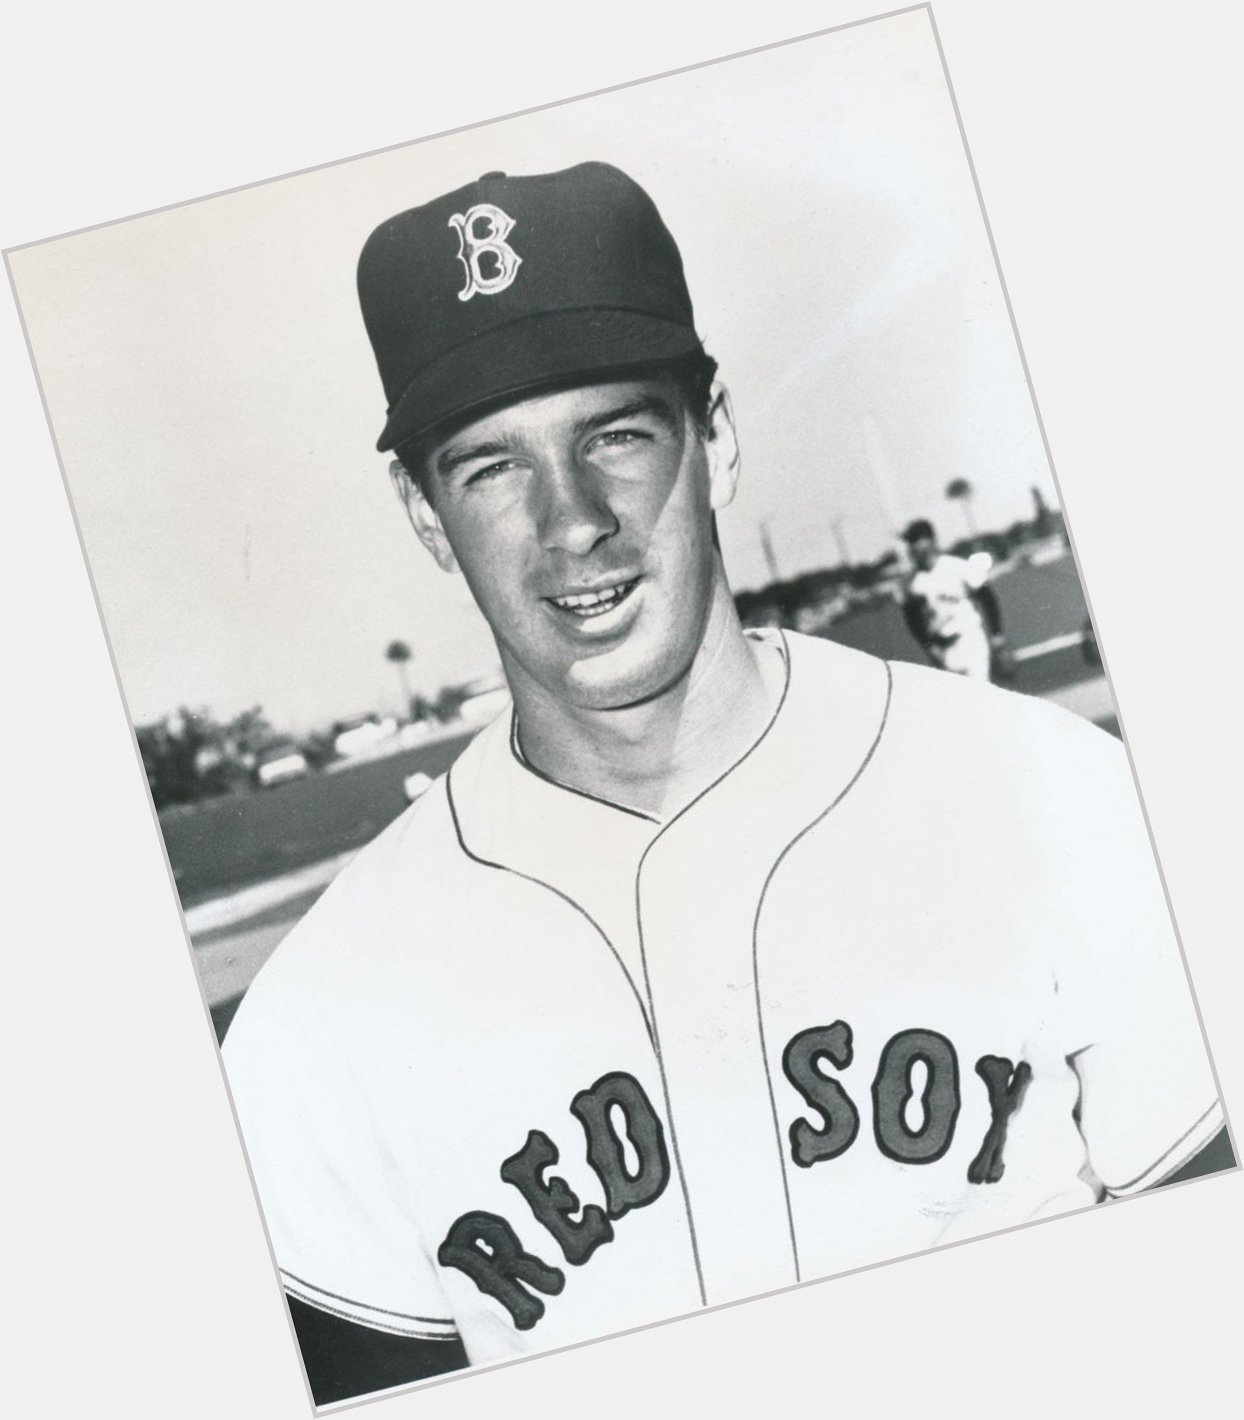 Happy 73rd birthday to \"Impossible Dream\" ace Jim Lonborg! 